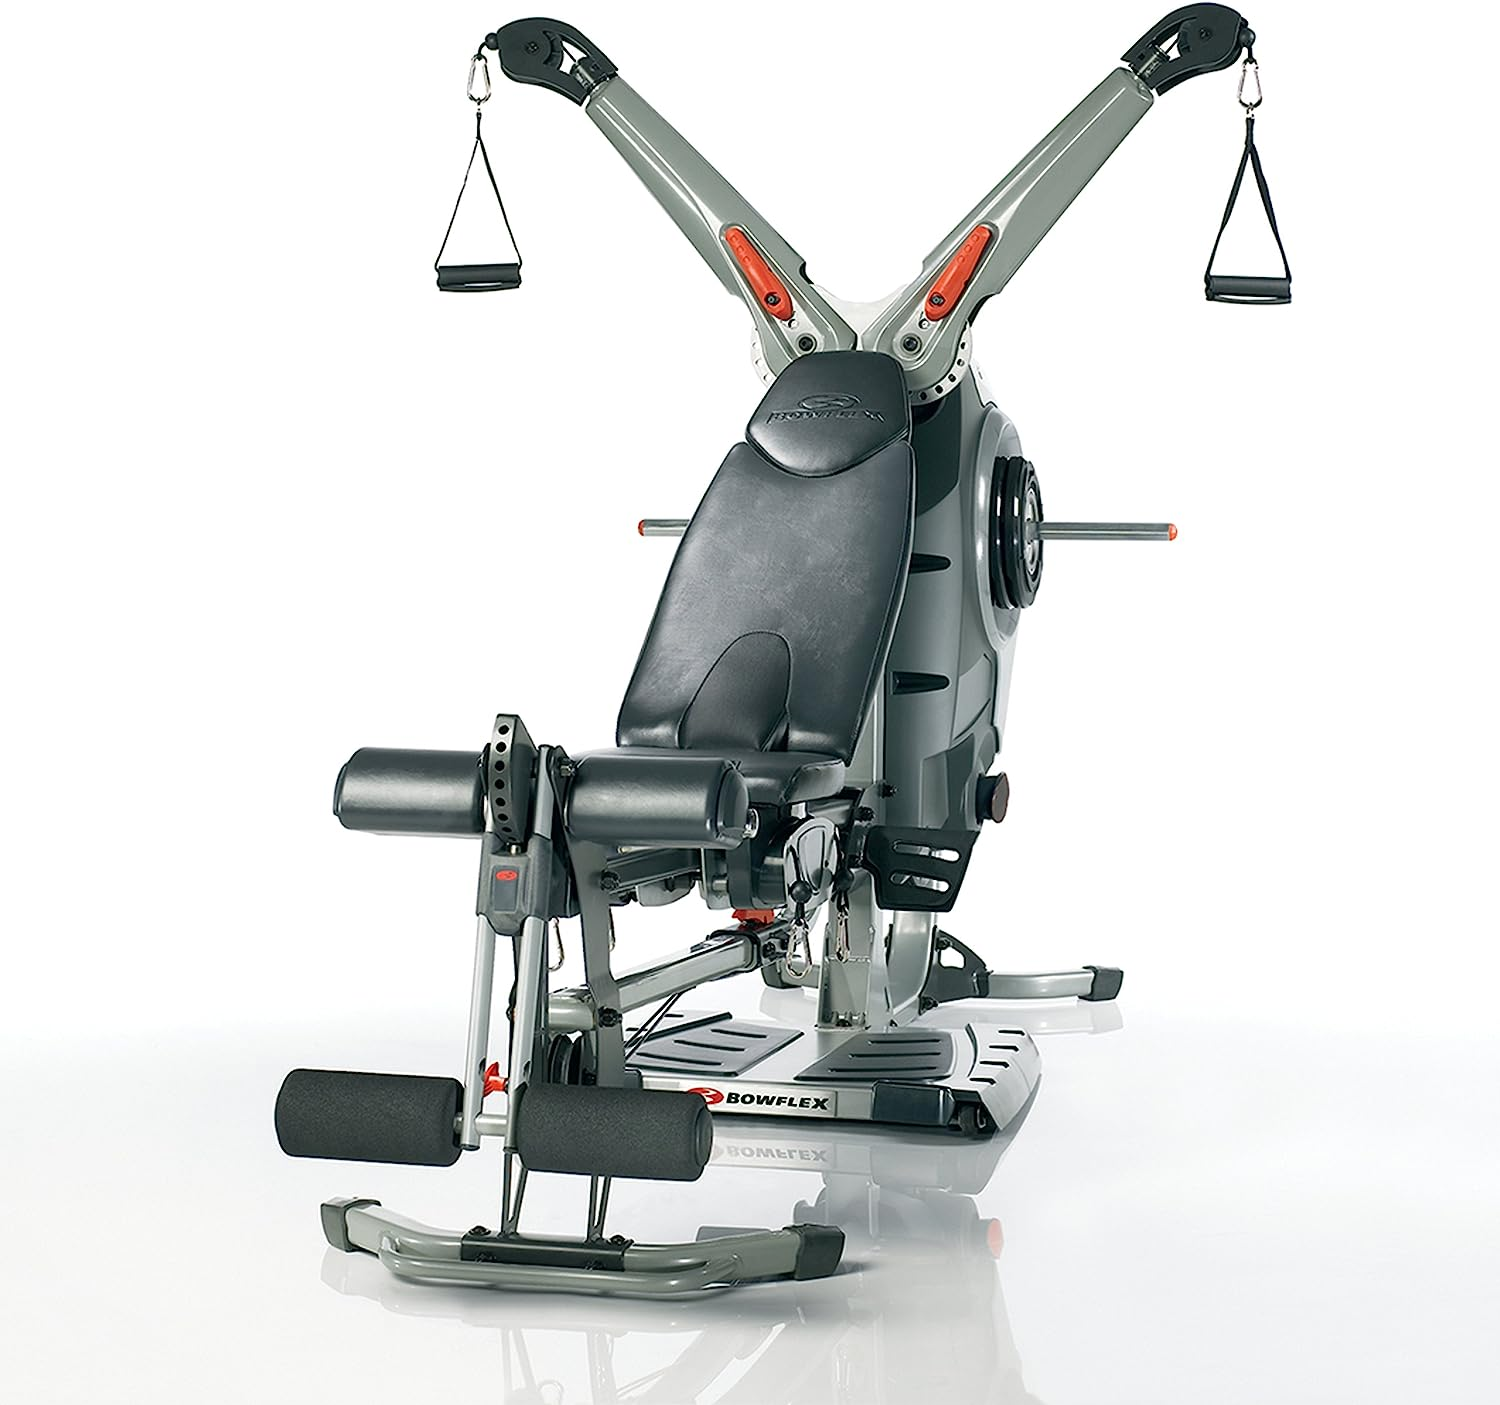 A Bowflex Revolution home gym machine with a variety of exercise equipment